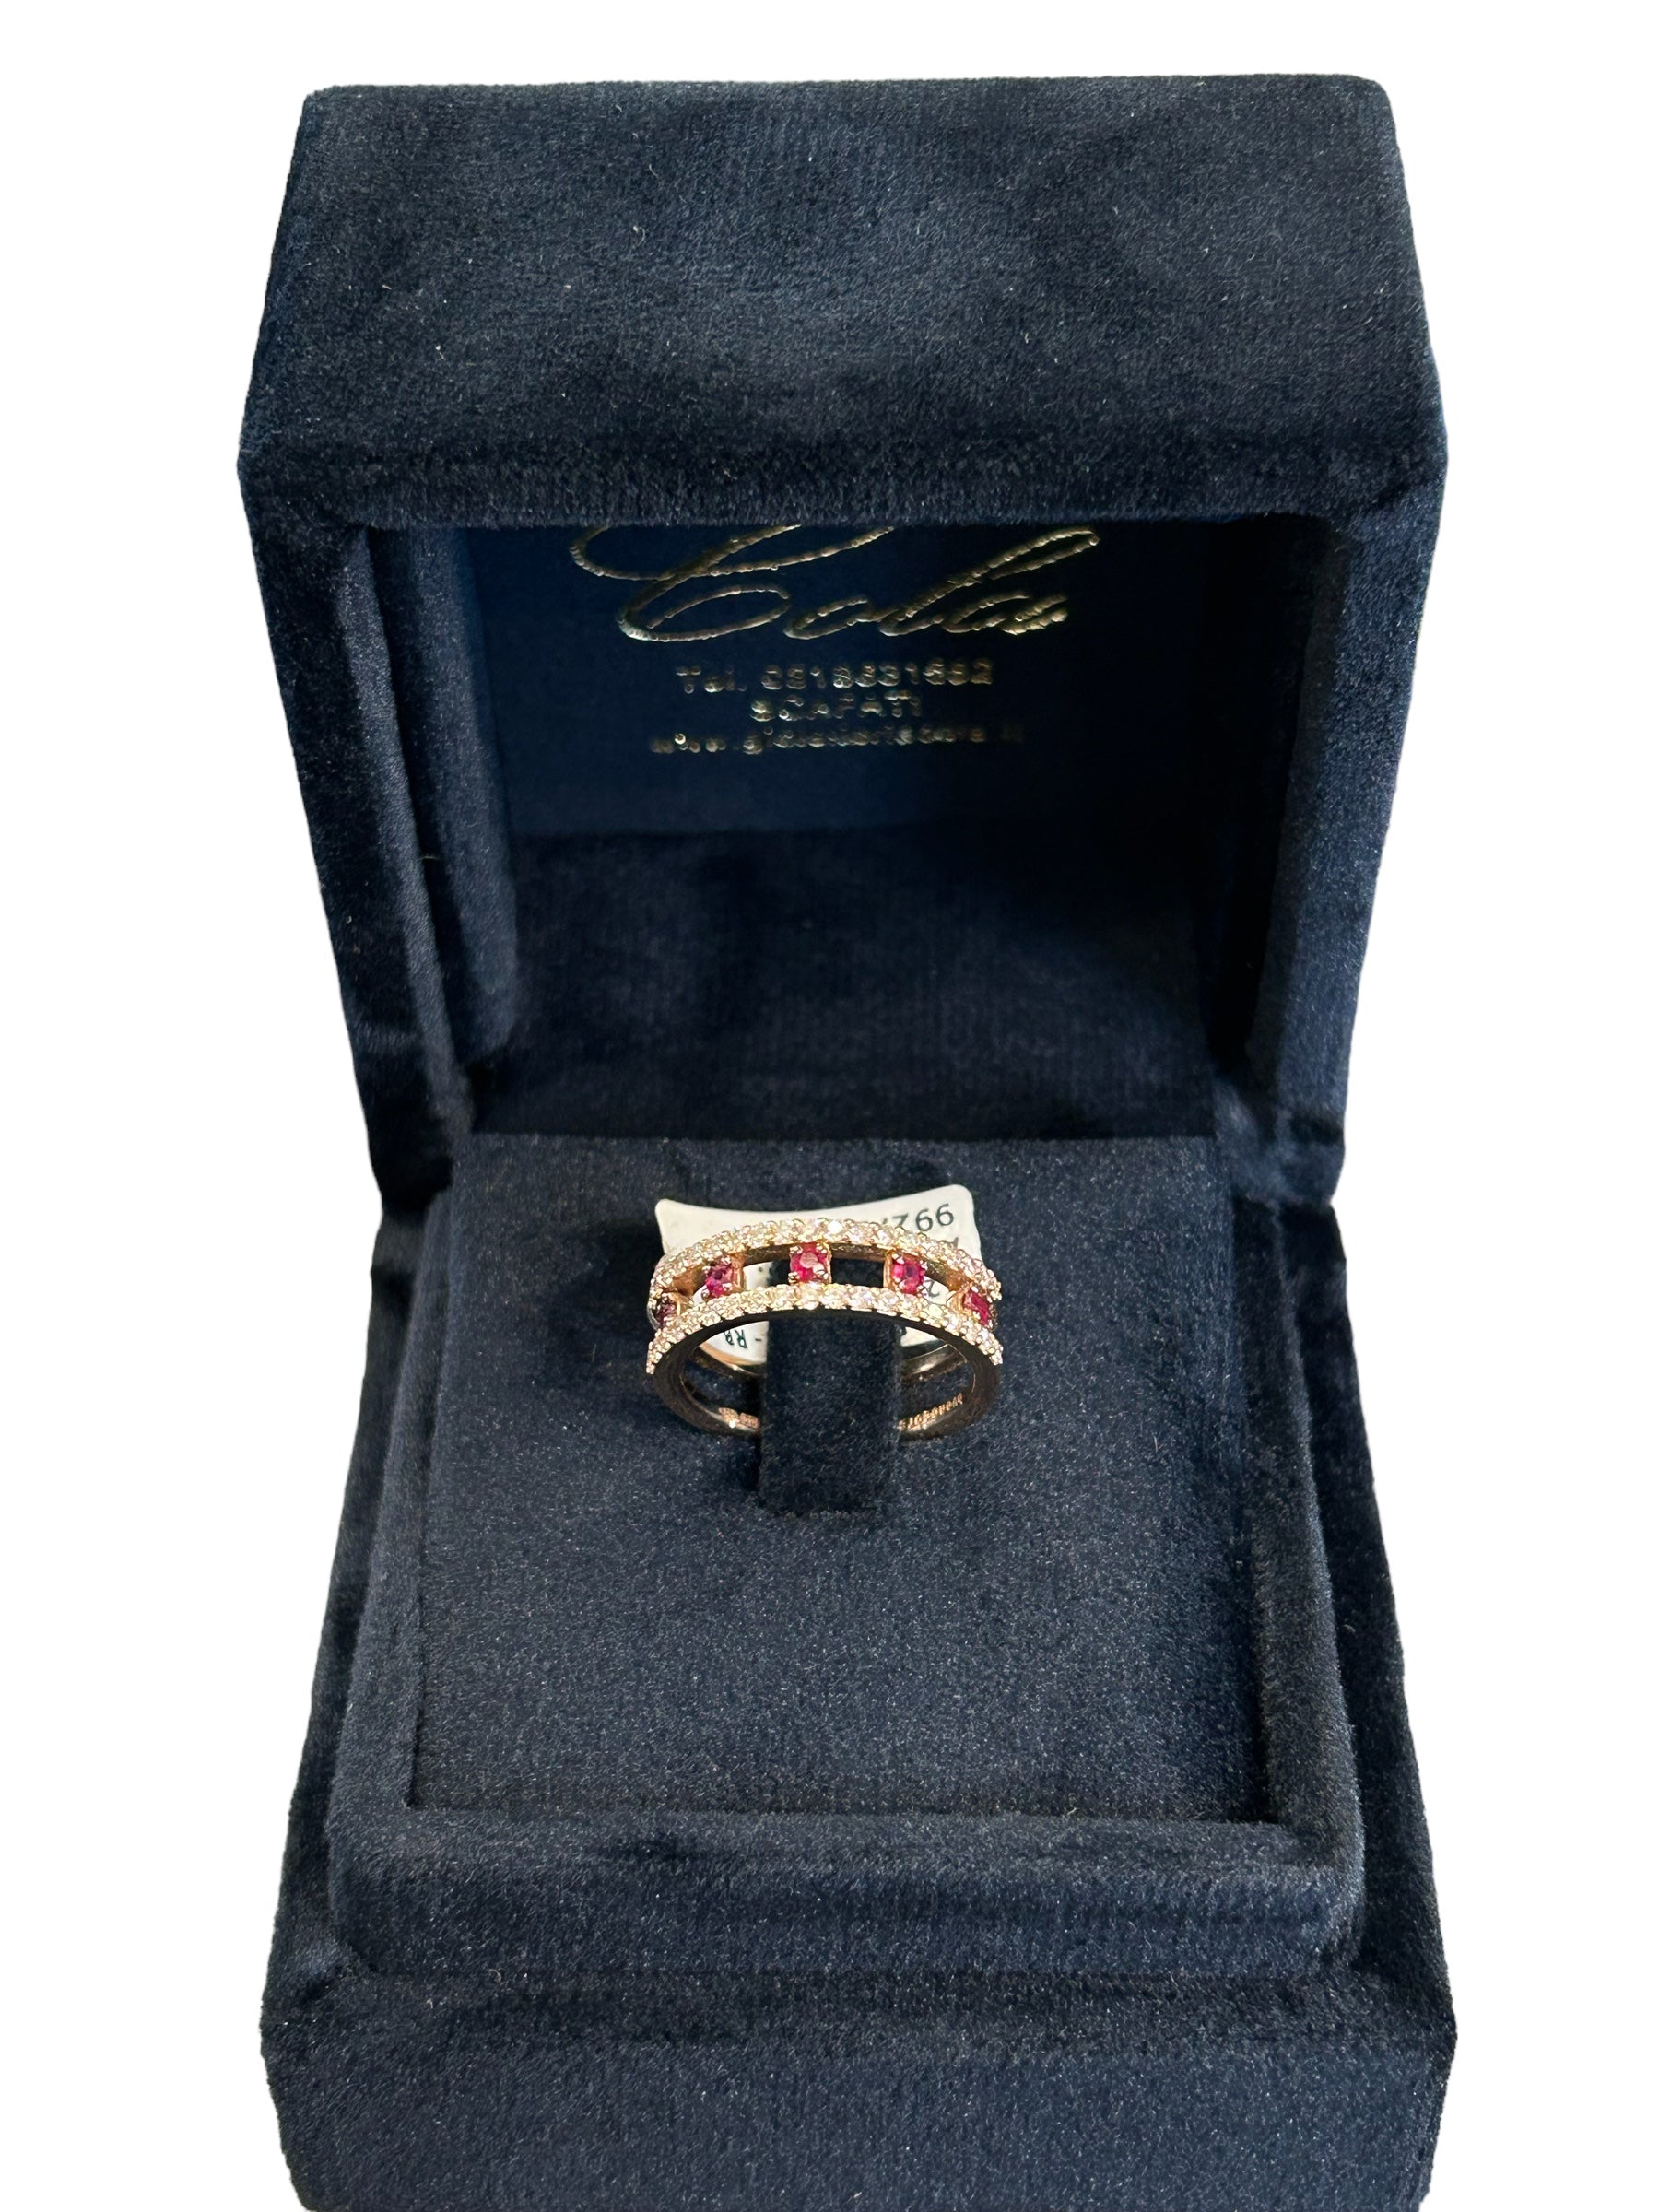 18kt rose gold ring with 2 rows of white diamonds and 5 central rubies - 659A06MP